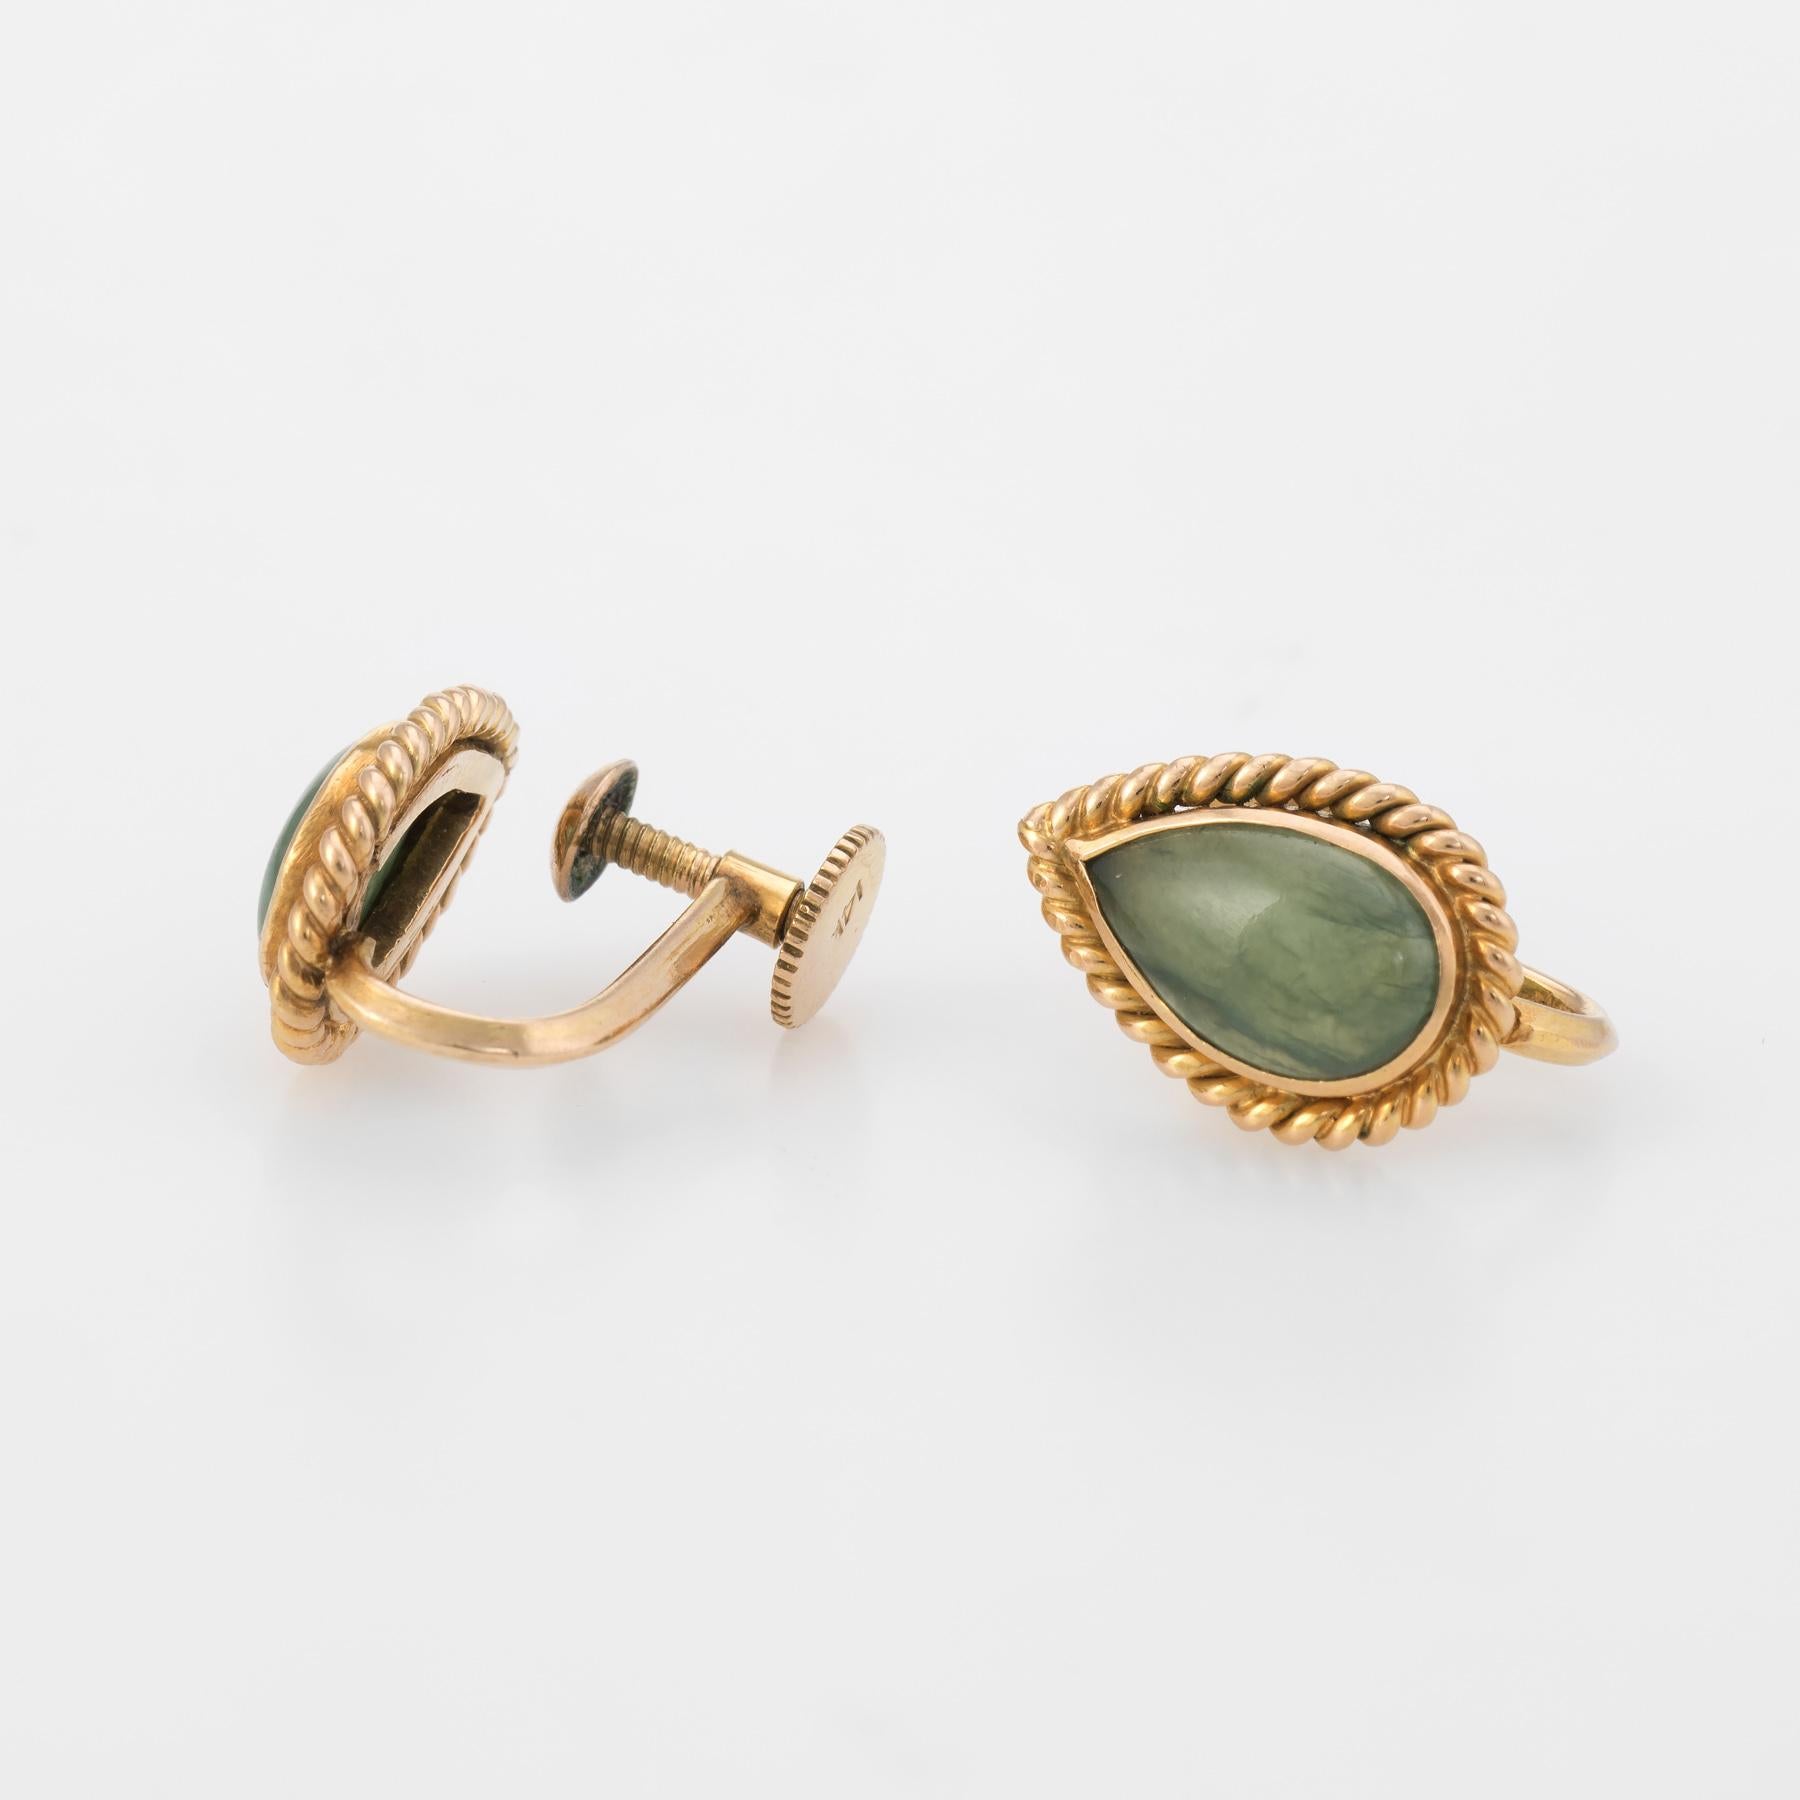 Finely detailed pair of vintage jade earrings (circa 1950s to 1960s), crafted in 14k yellow gold. 

Cabochon cut jade measures 10mm x 6mm (estimated at 1.50 carats each - 3 carats total estimated weight). The jade is in excellent condition and free